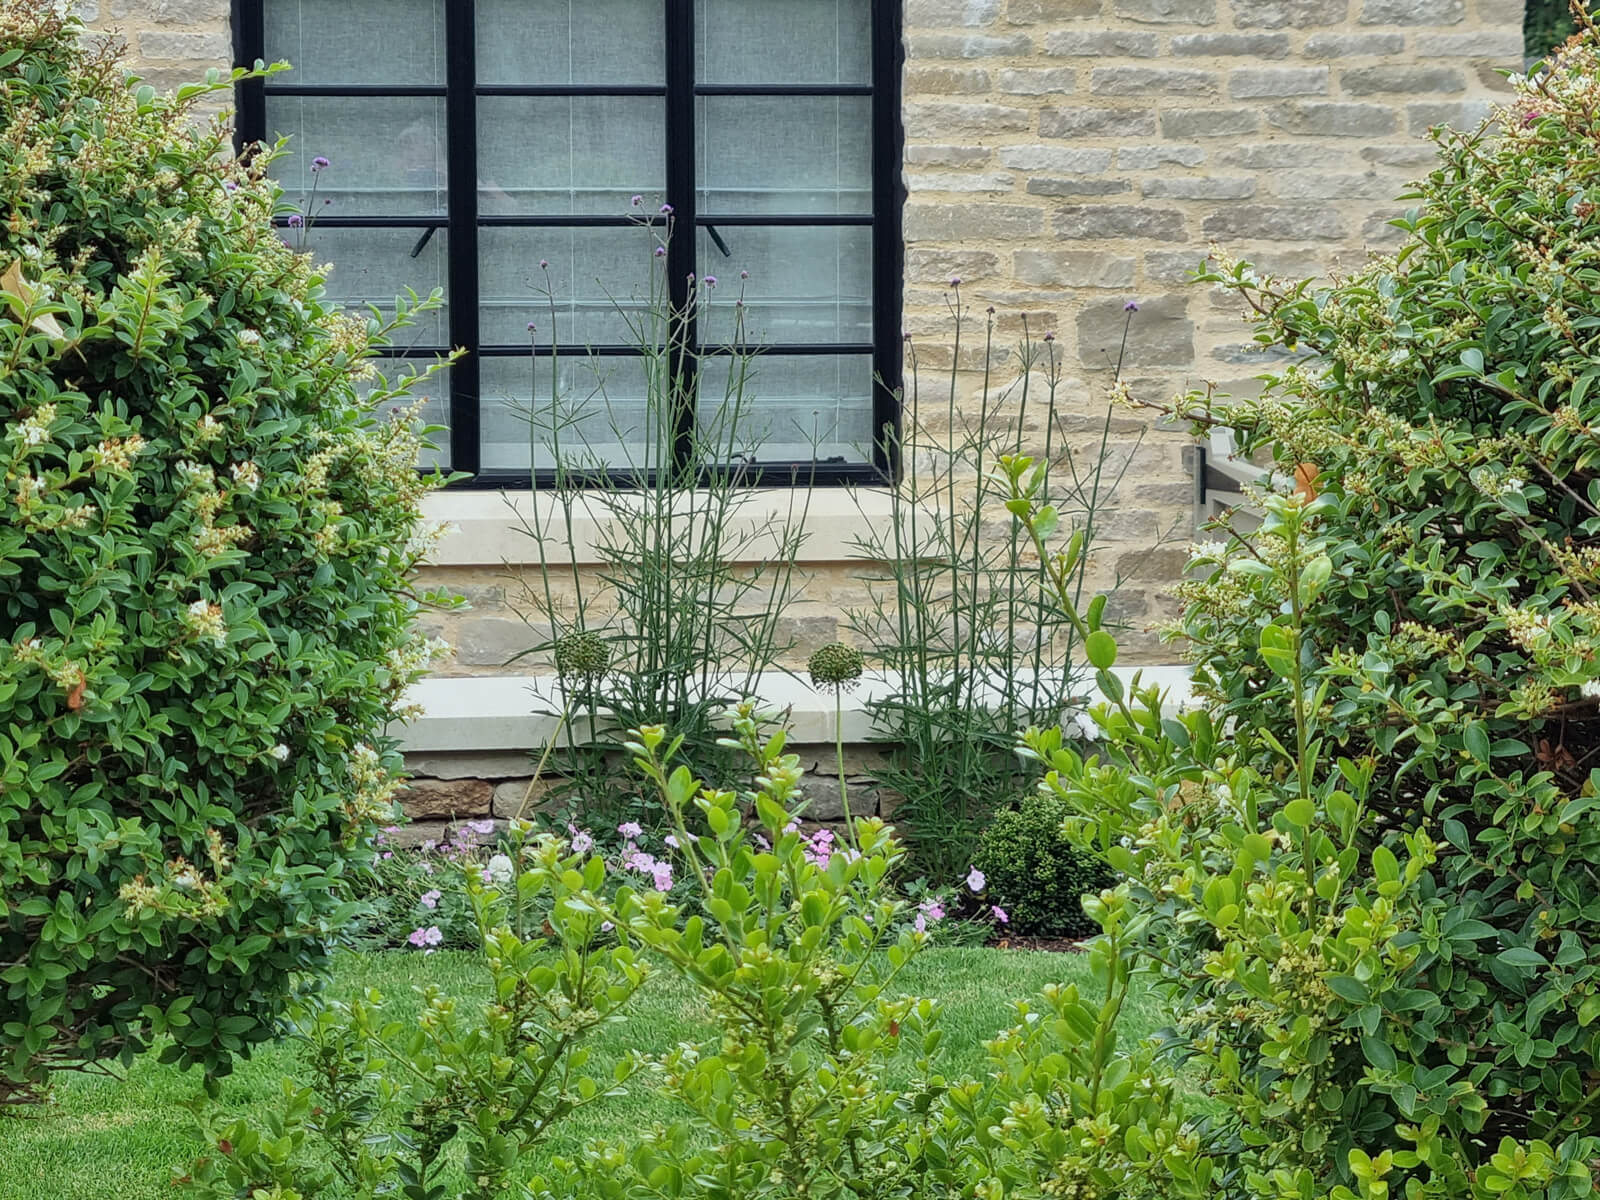 The Courtyard and Cottage Garden, a low maintenance mediterranean themed garden for a small country house. Designed by April House – Award Winning Cotswolds Garden Design